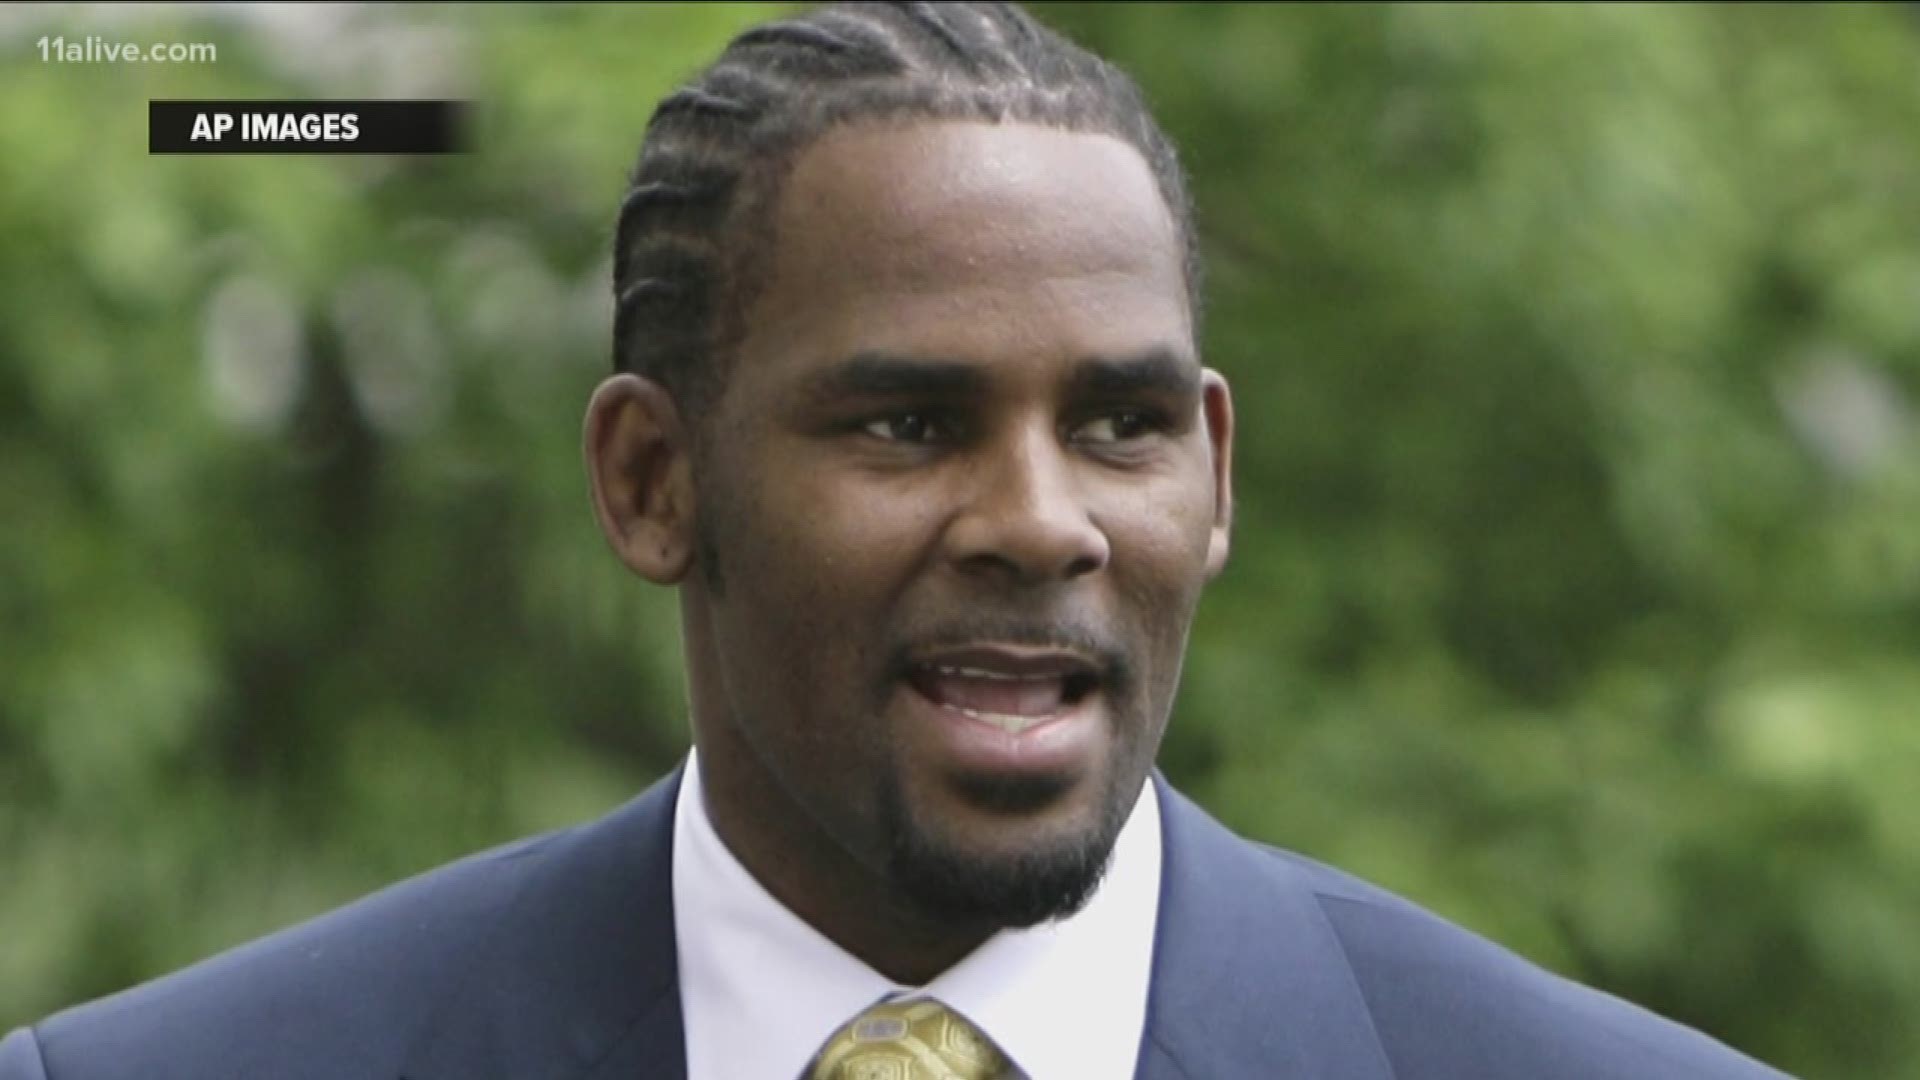 An Atlanta-based attorney who represents an alleged victim of  R. Kelly says there's enough evidence out there to convict the singer.